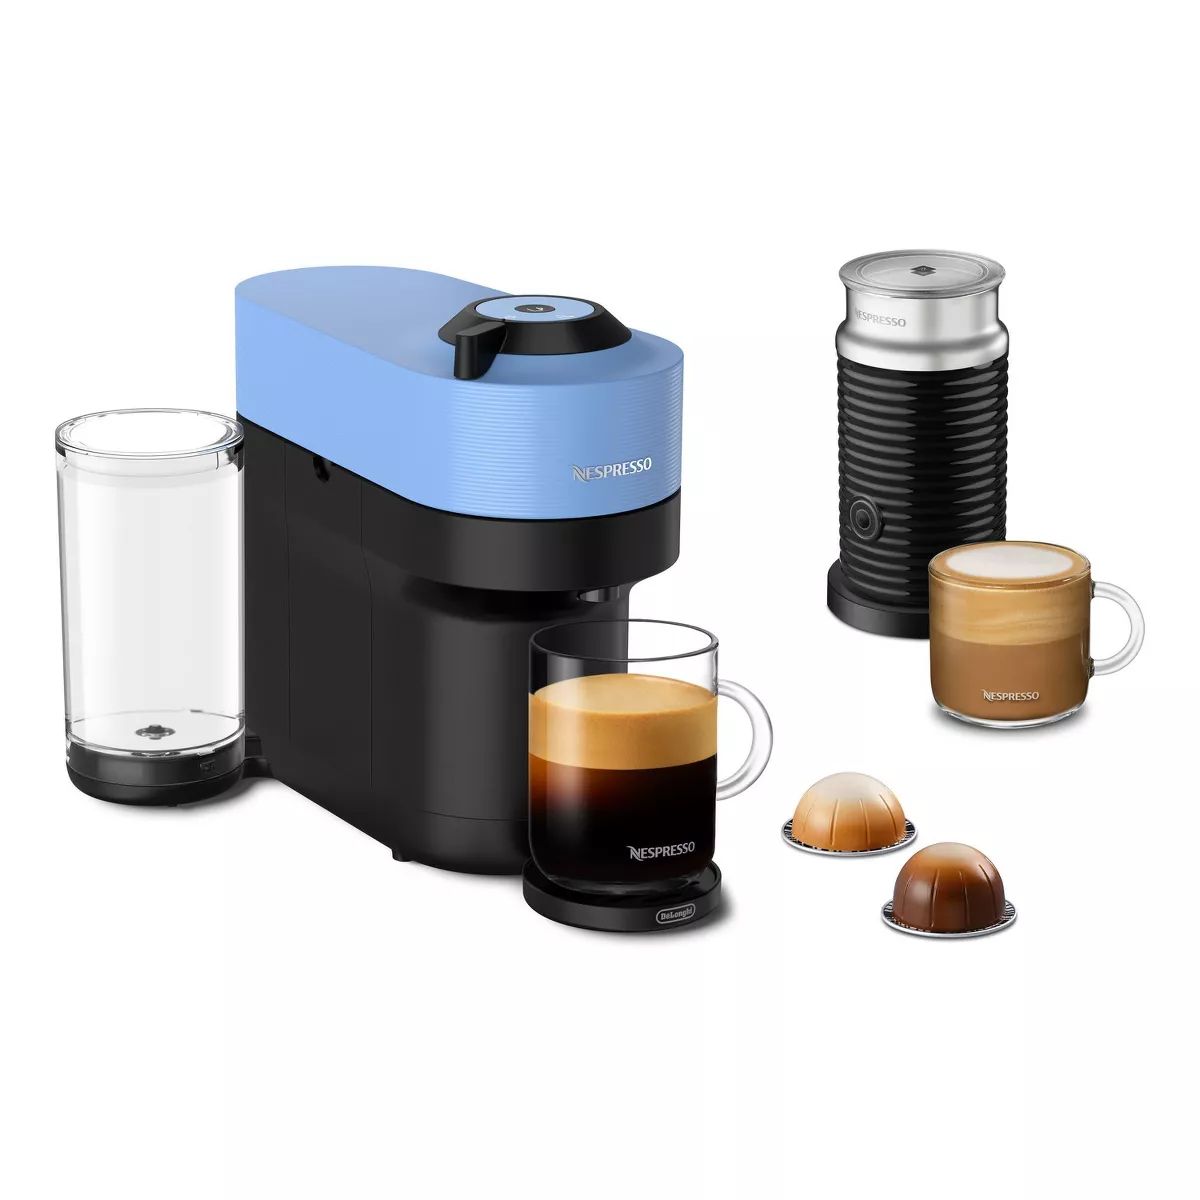 Nespresso Vertuo Pop+ Combination Espresso and Coffee Maker with Milk Frother | Target